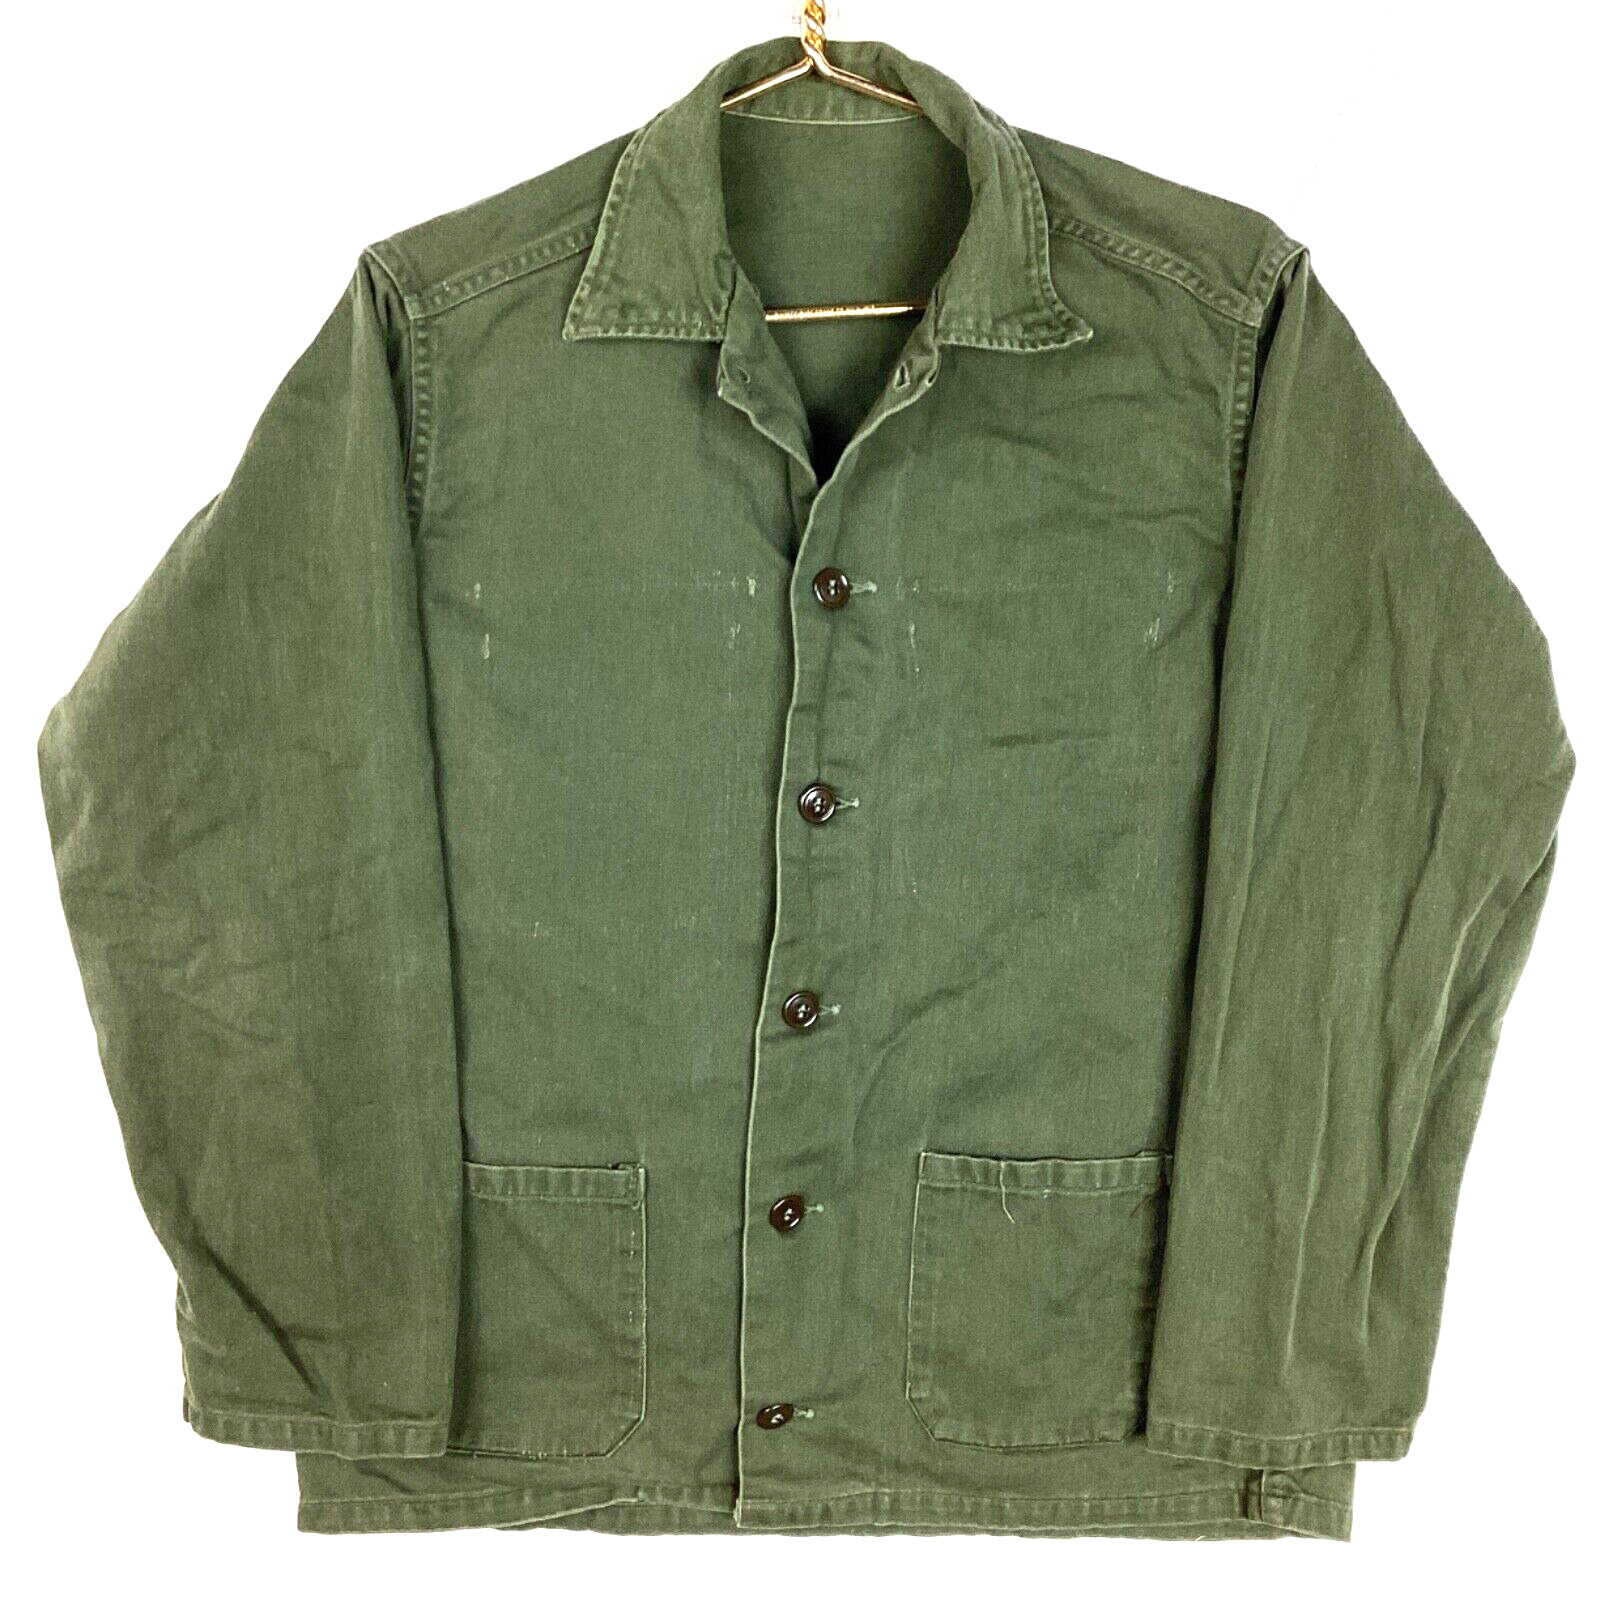 Vintage Us Army Og-107 Button Up Shirt Size Small Green Vietnam Era 60s 70s